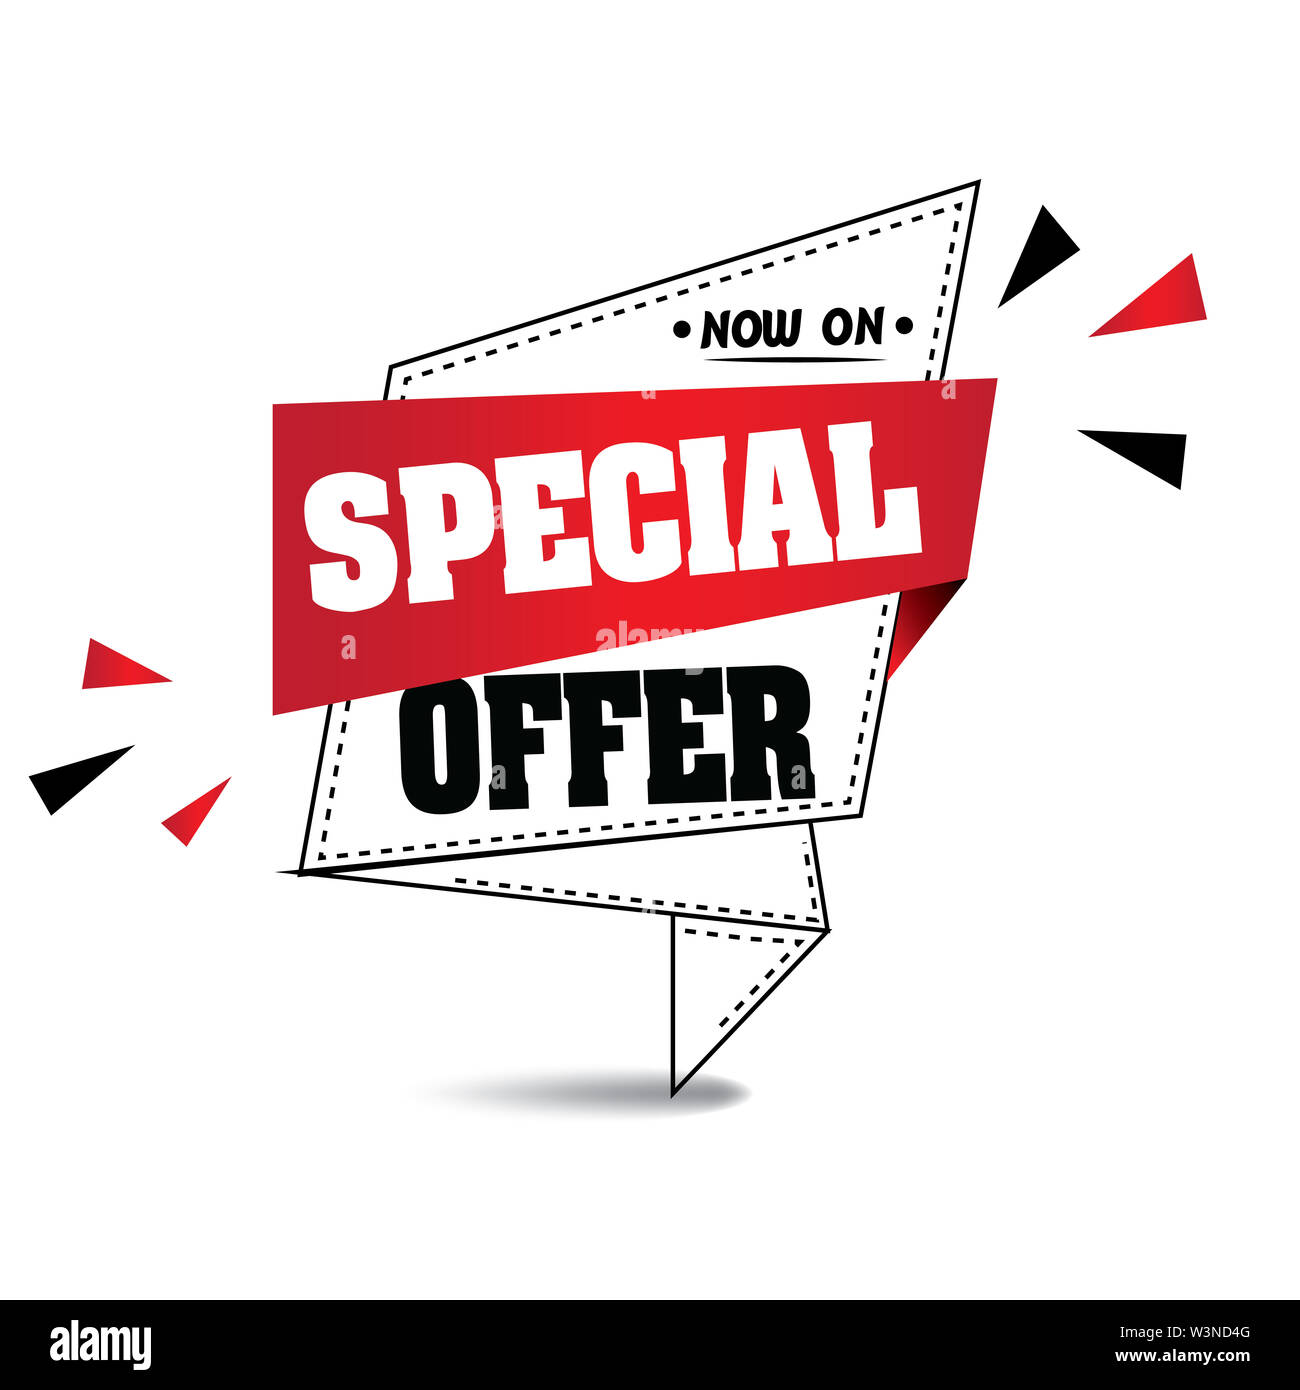 special offer banner vector illustration Stock Photo